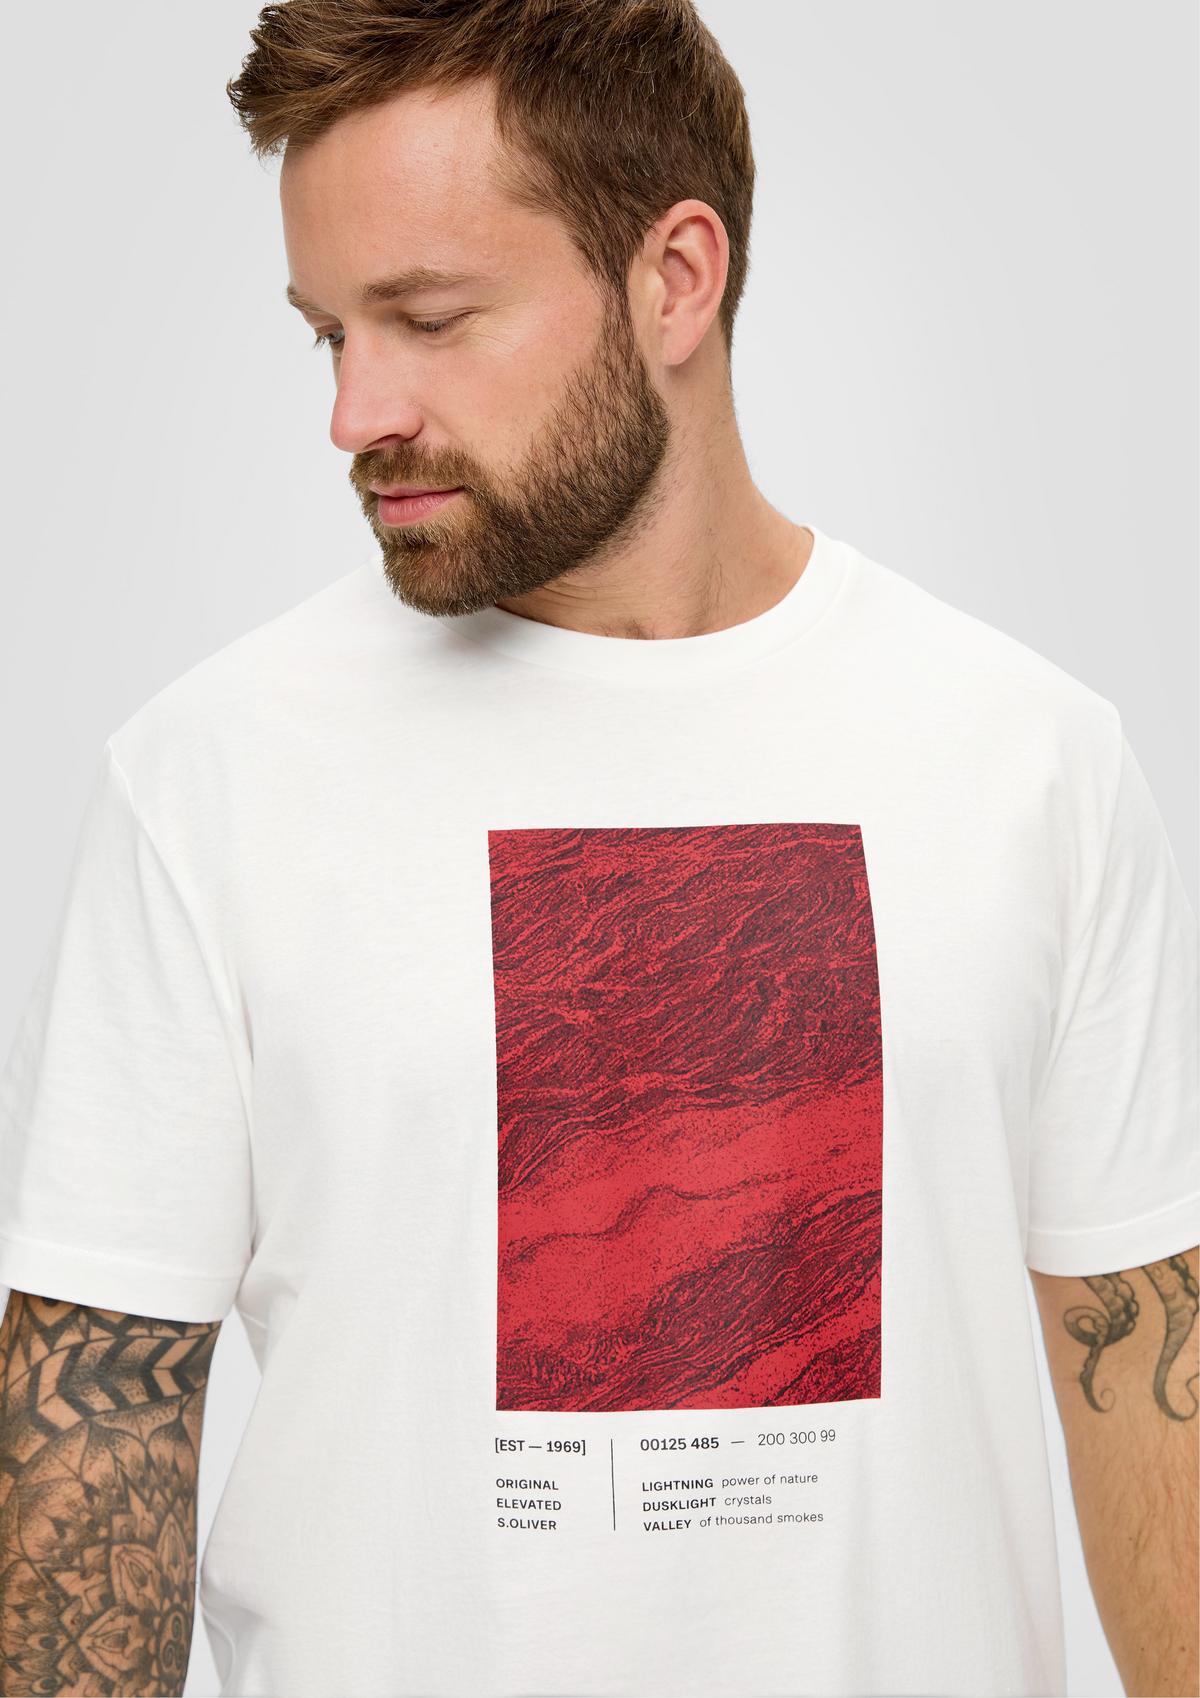 s.Oliver T-shirt with a front print